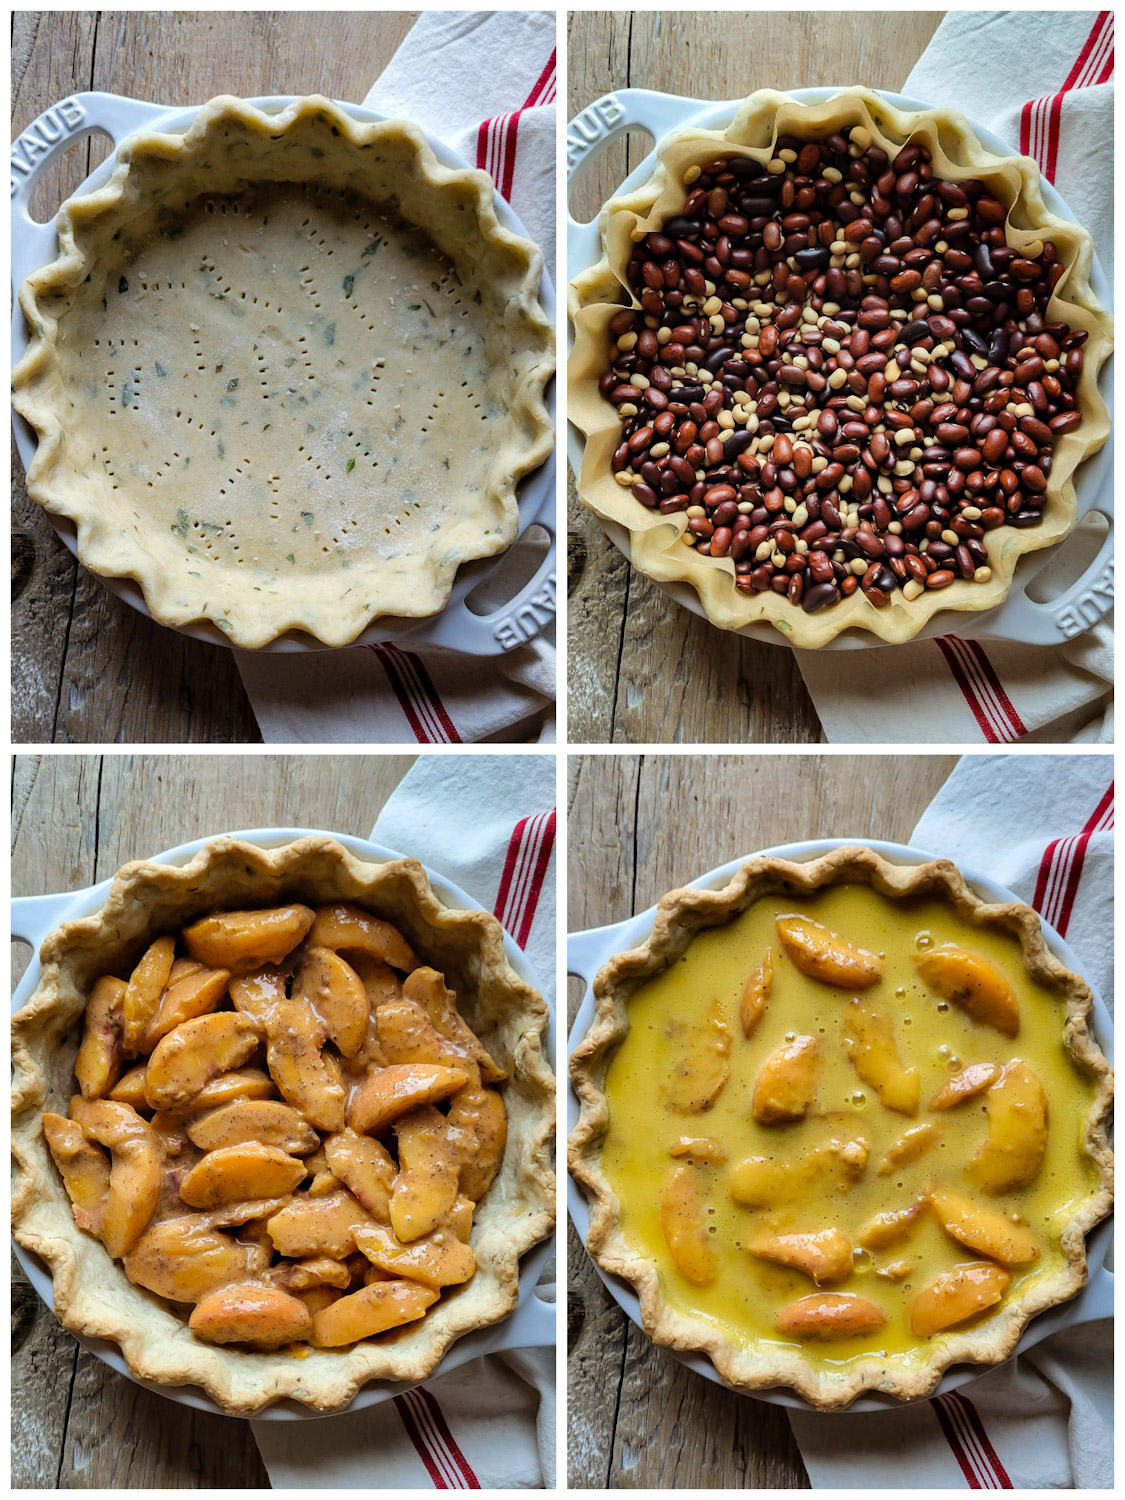 photo montage of a pie being made. The basil crust is in the first image. Parchment paper and dried beans are added to the pie shell in the second image. Sliced peaches tossed in cinnamon are added to the par-baked crust in the third image. The custard filling is poured over the peaches in the fourth image.